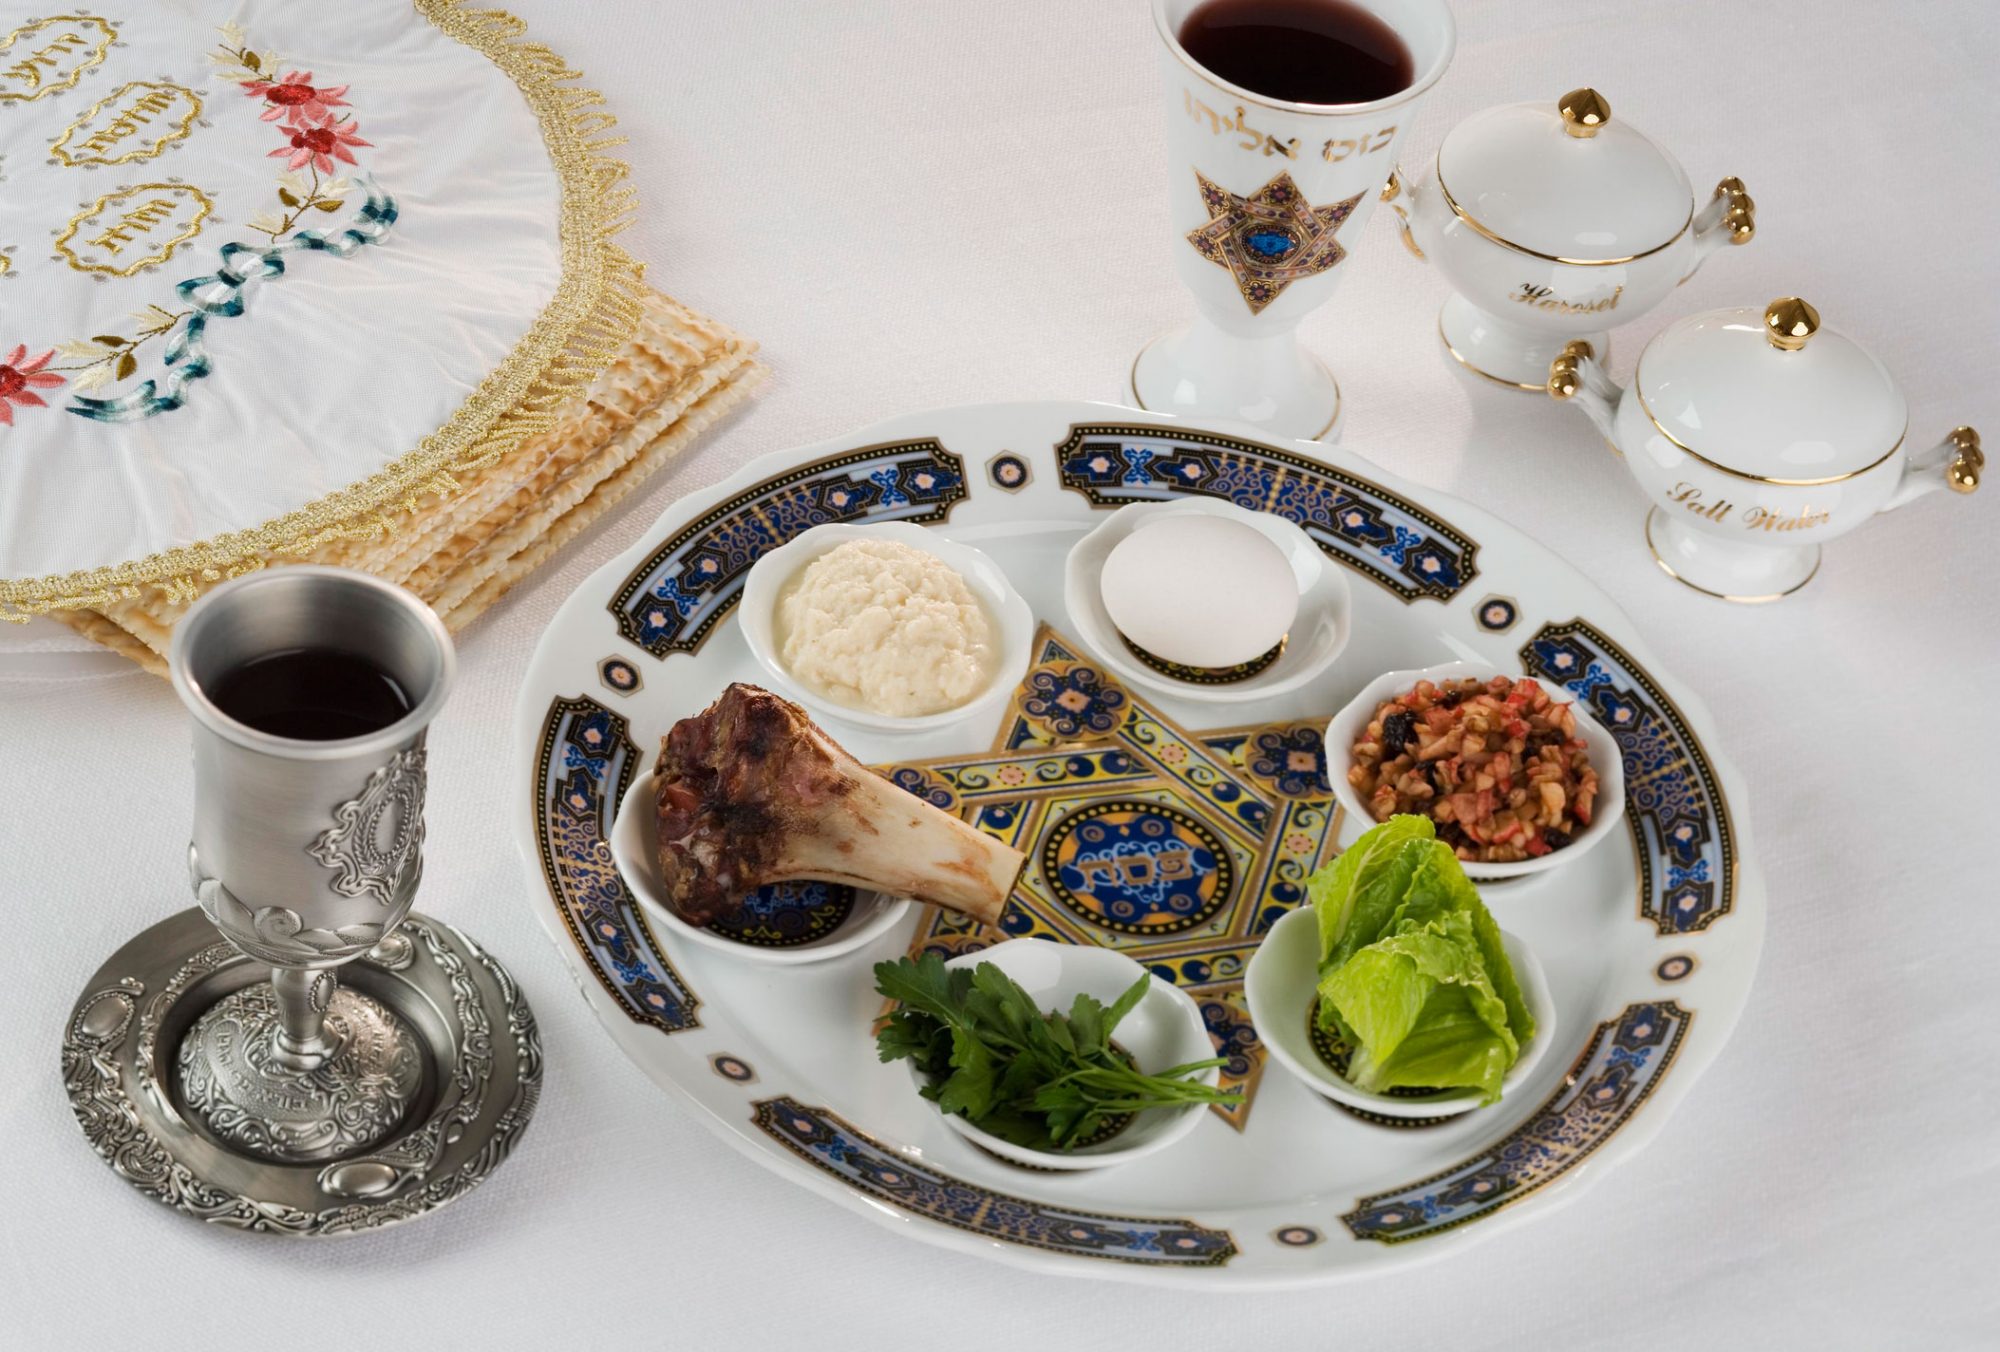 Passover Meal portrayal March 30